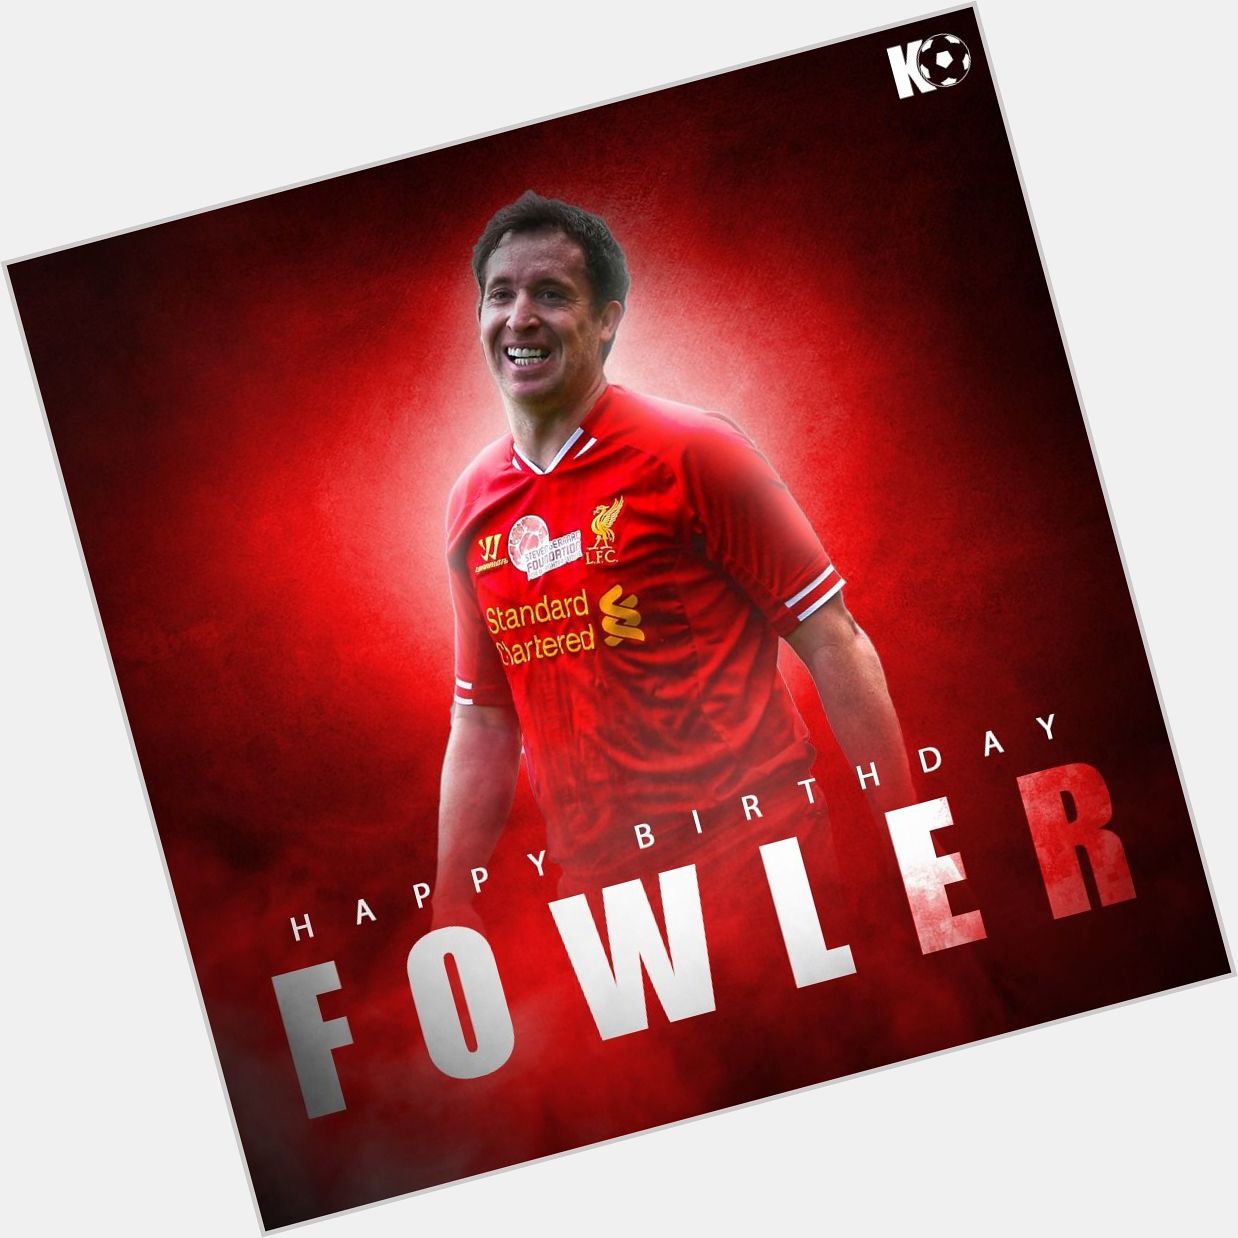 Join in wishing Liverpool legend Robbie Fowler a Happy Birthday! 